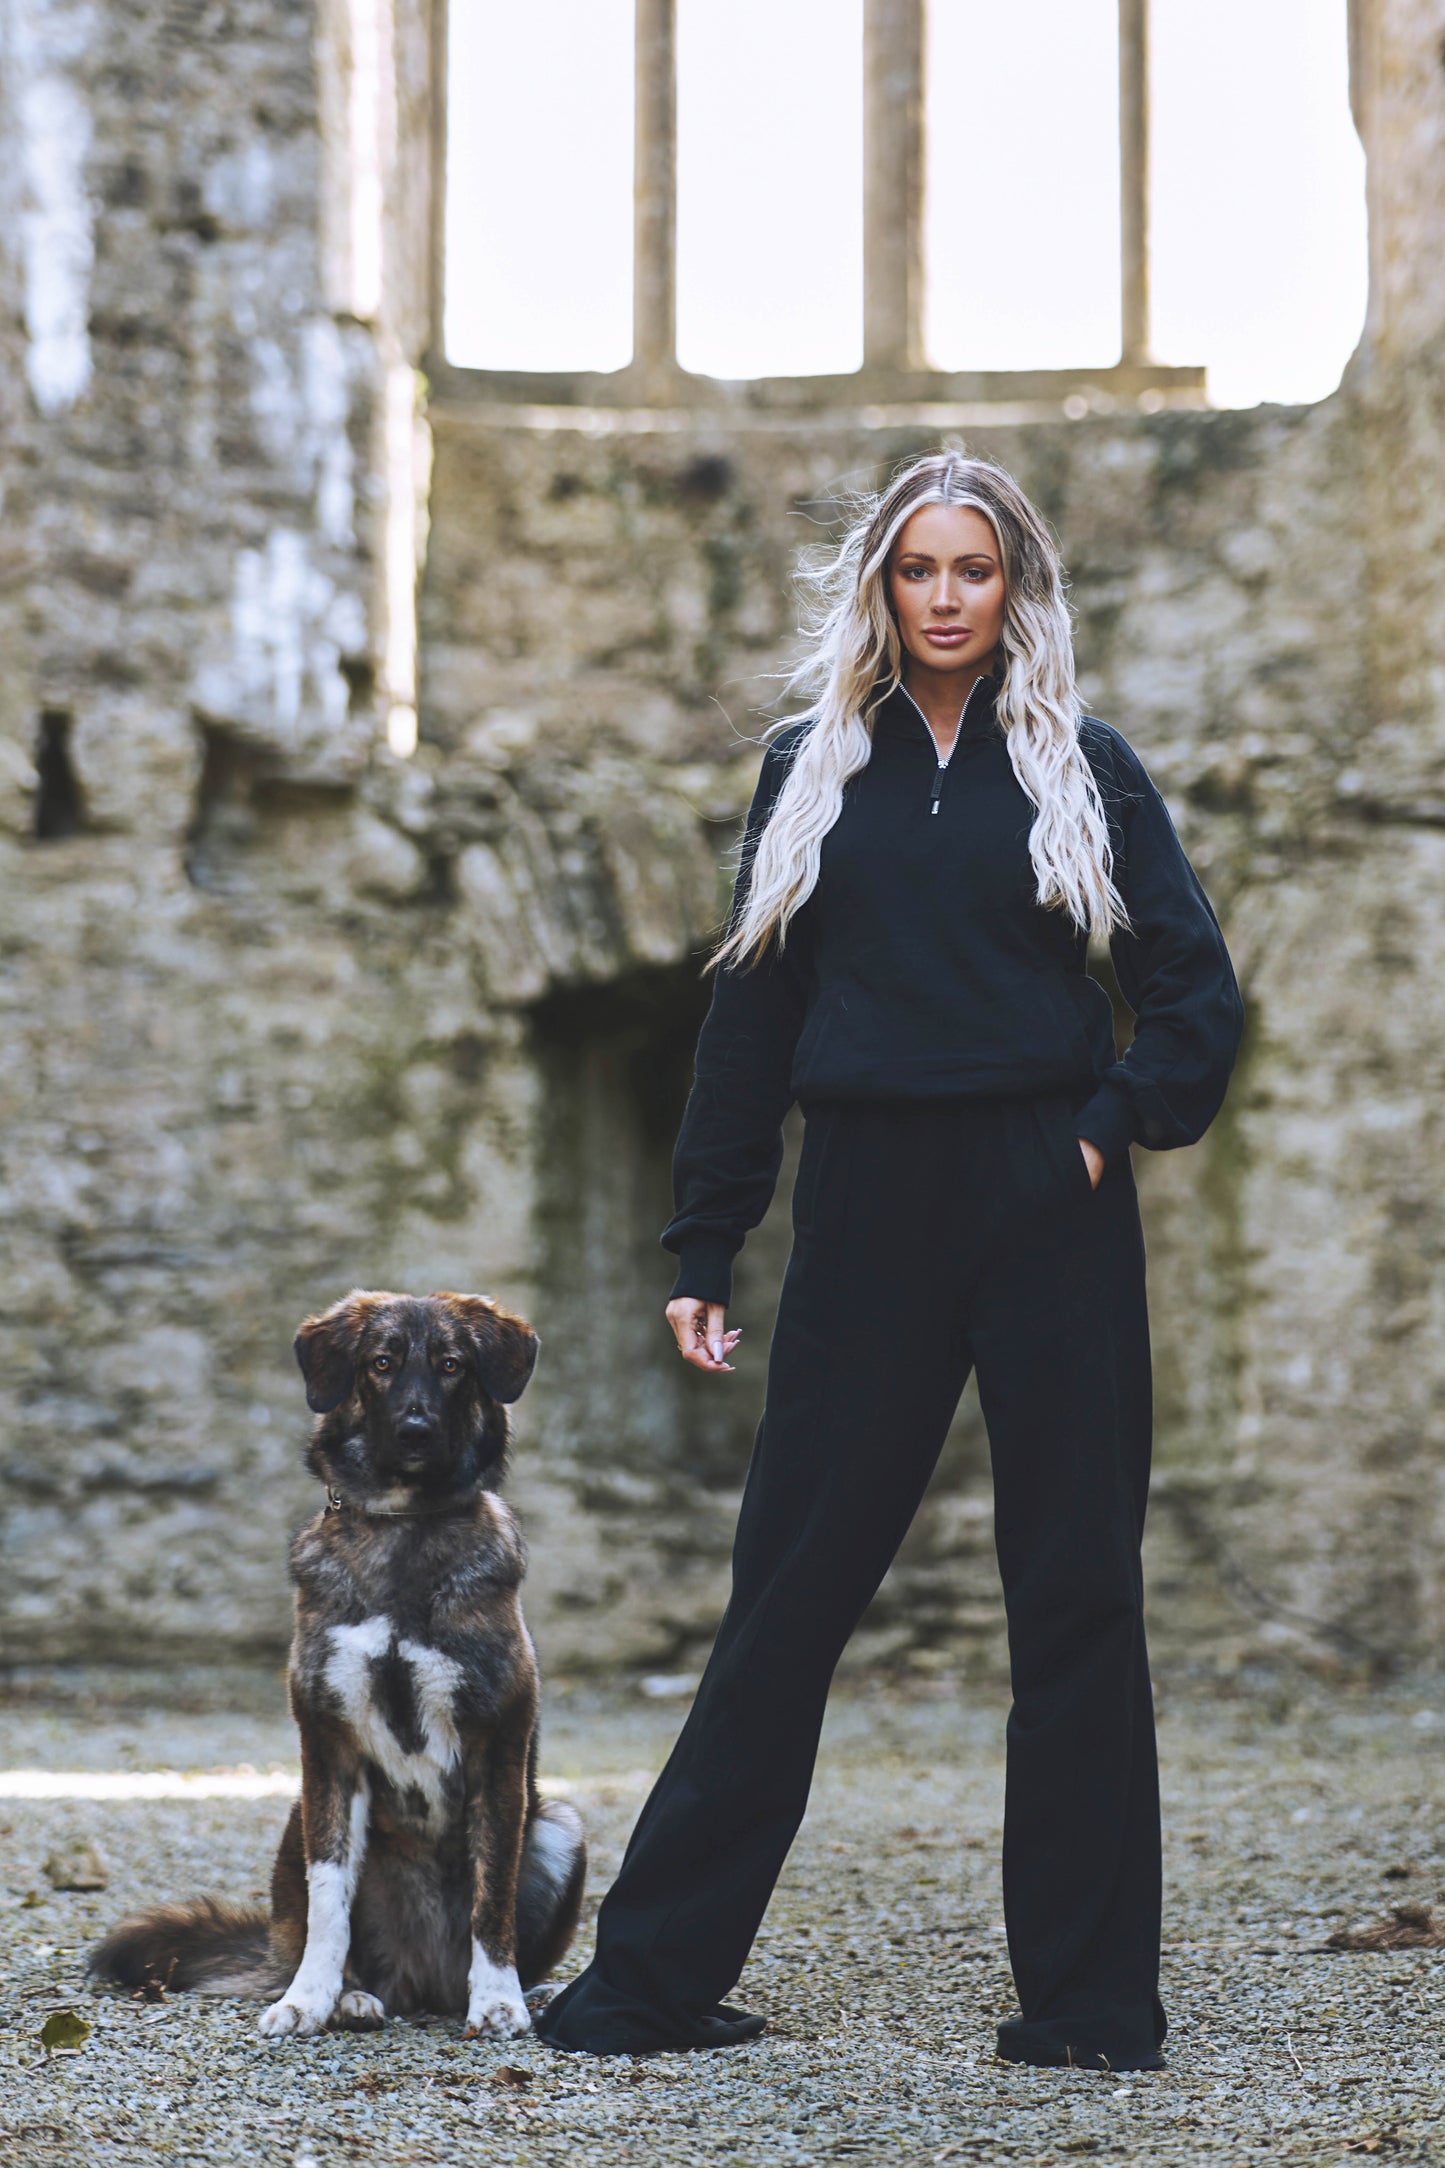 model wearing full womens luxury tracksuit in black posing with dog